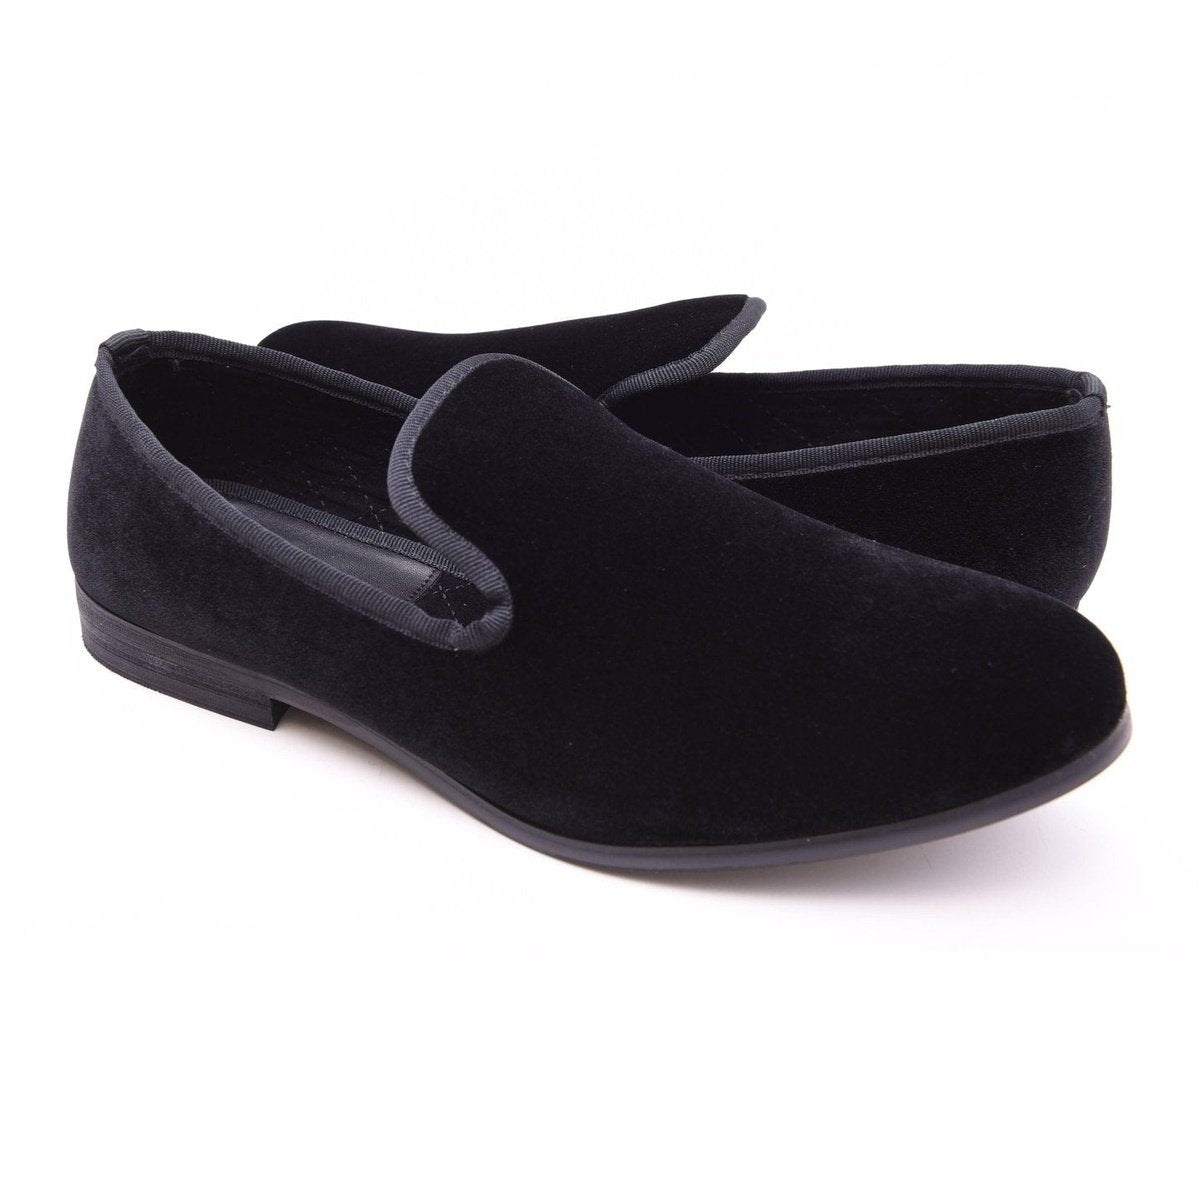 The Lapel Project 8 The Lapel Project Black Velvet Loafer Prom Wedding Slip On Mens Dress Shoes